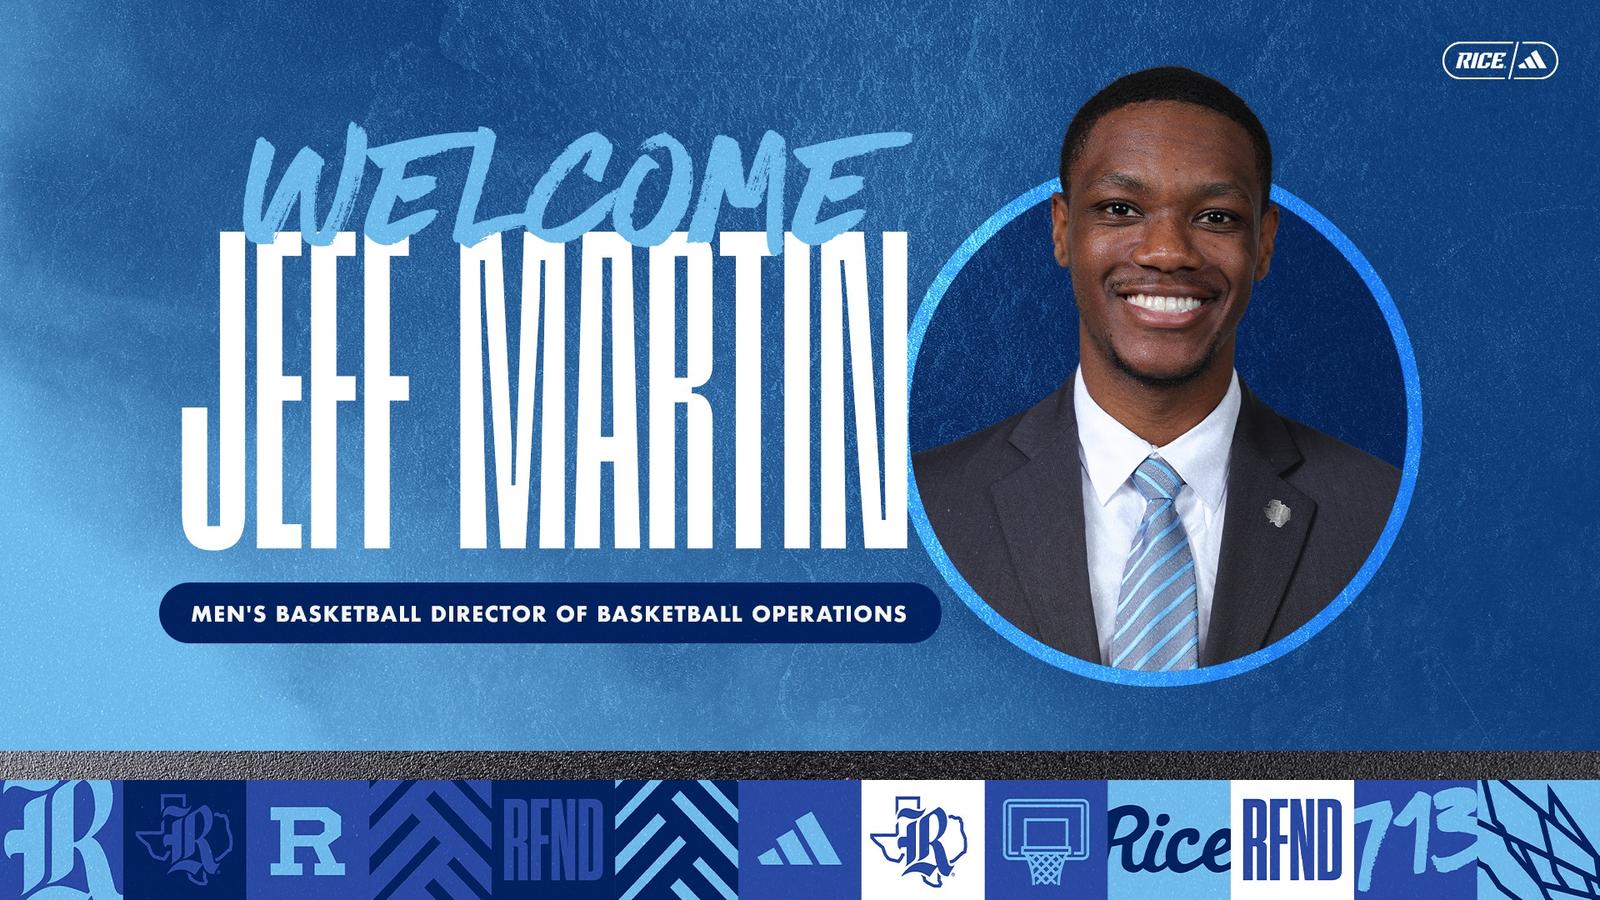 Jeff Martin Named Director of Operations for Rice Men’s Basketball: Extensive Experience in Basketball Operations and Coaching Success Highlighted